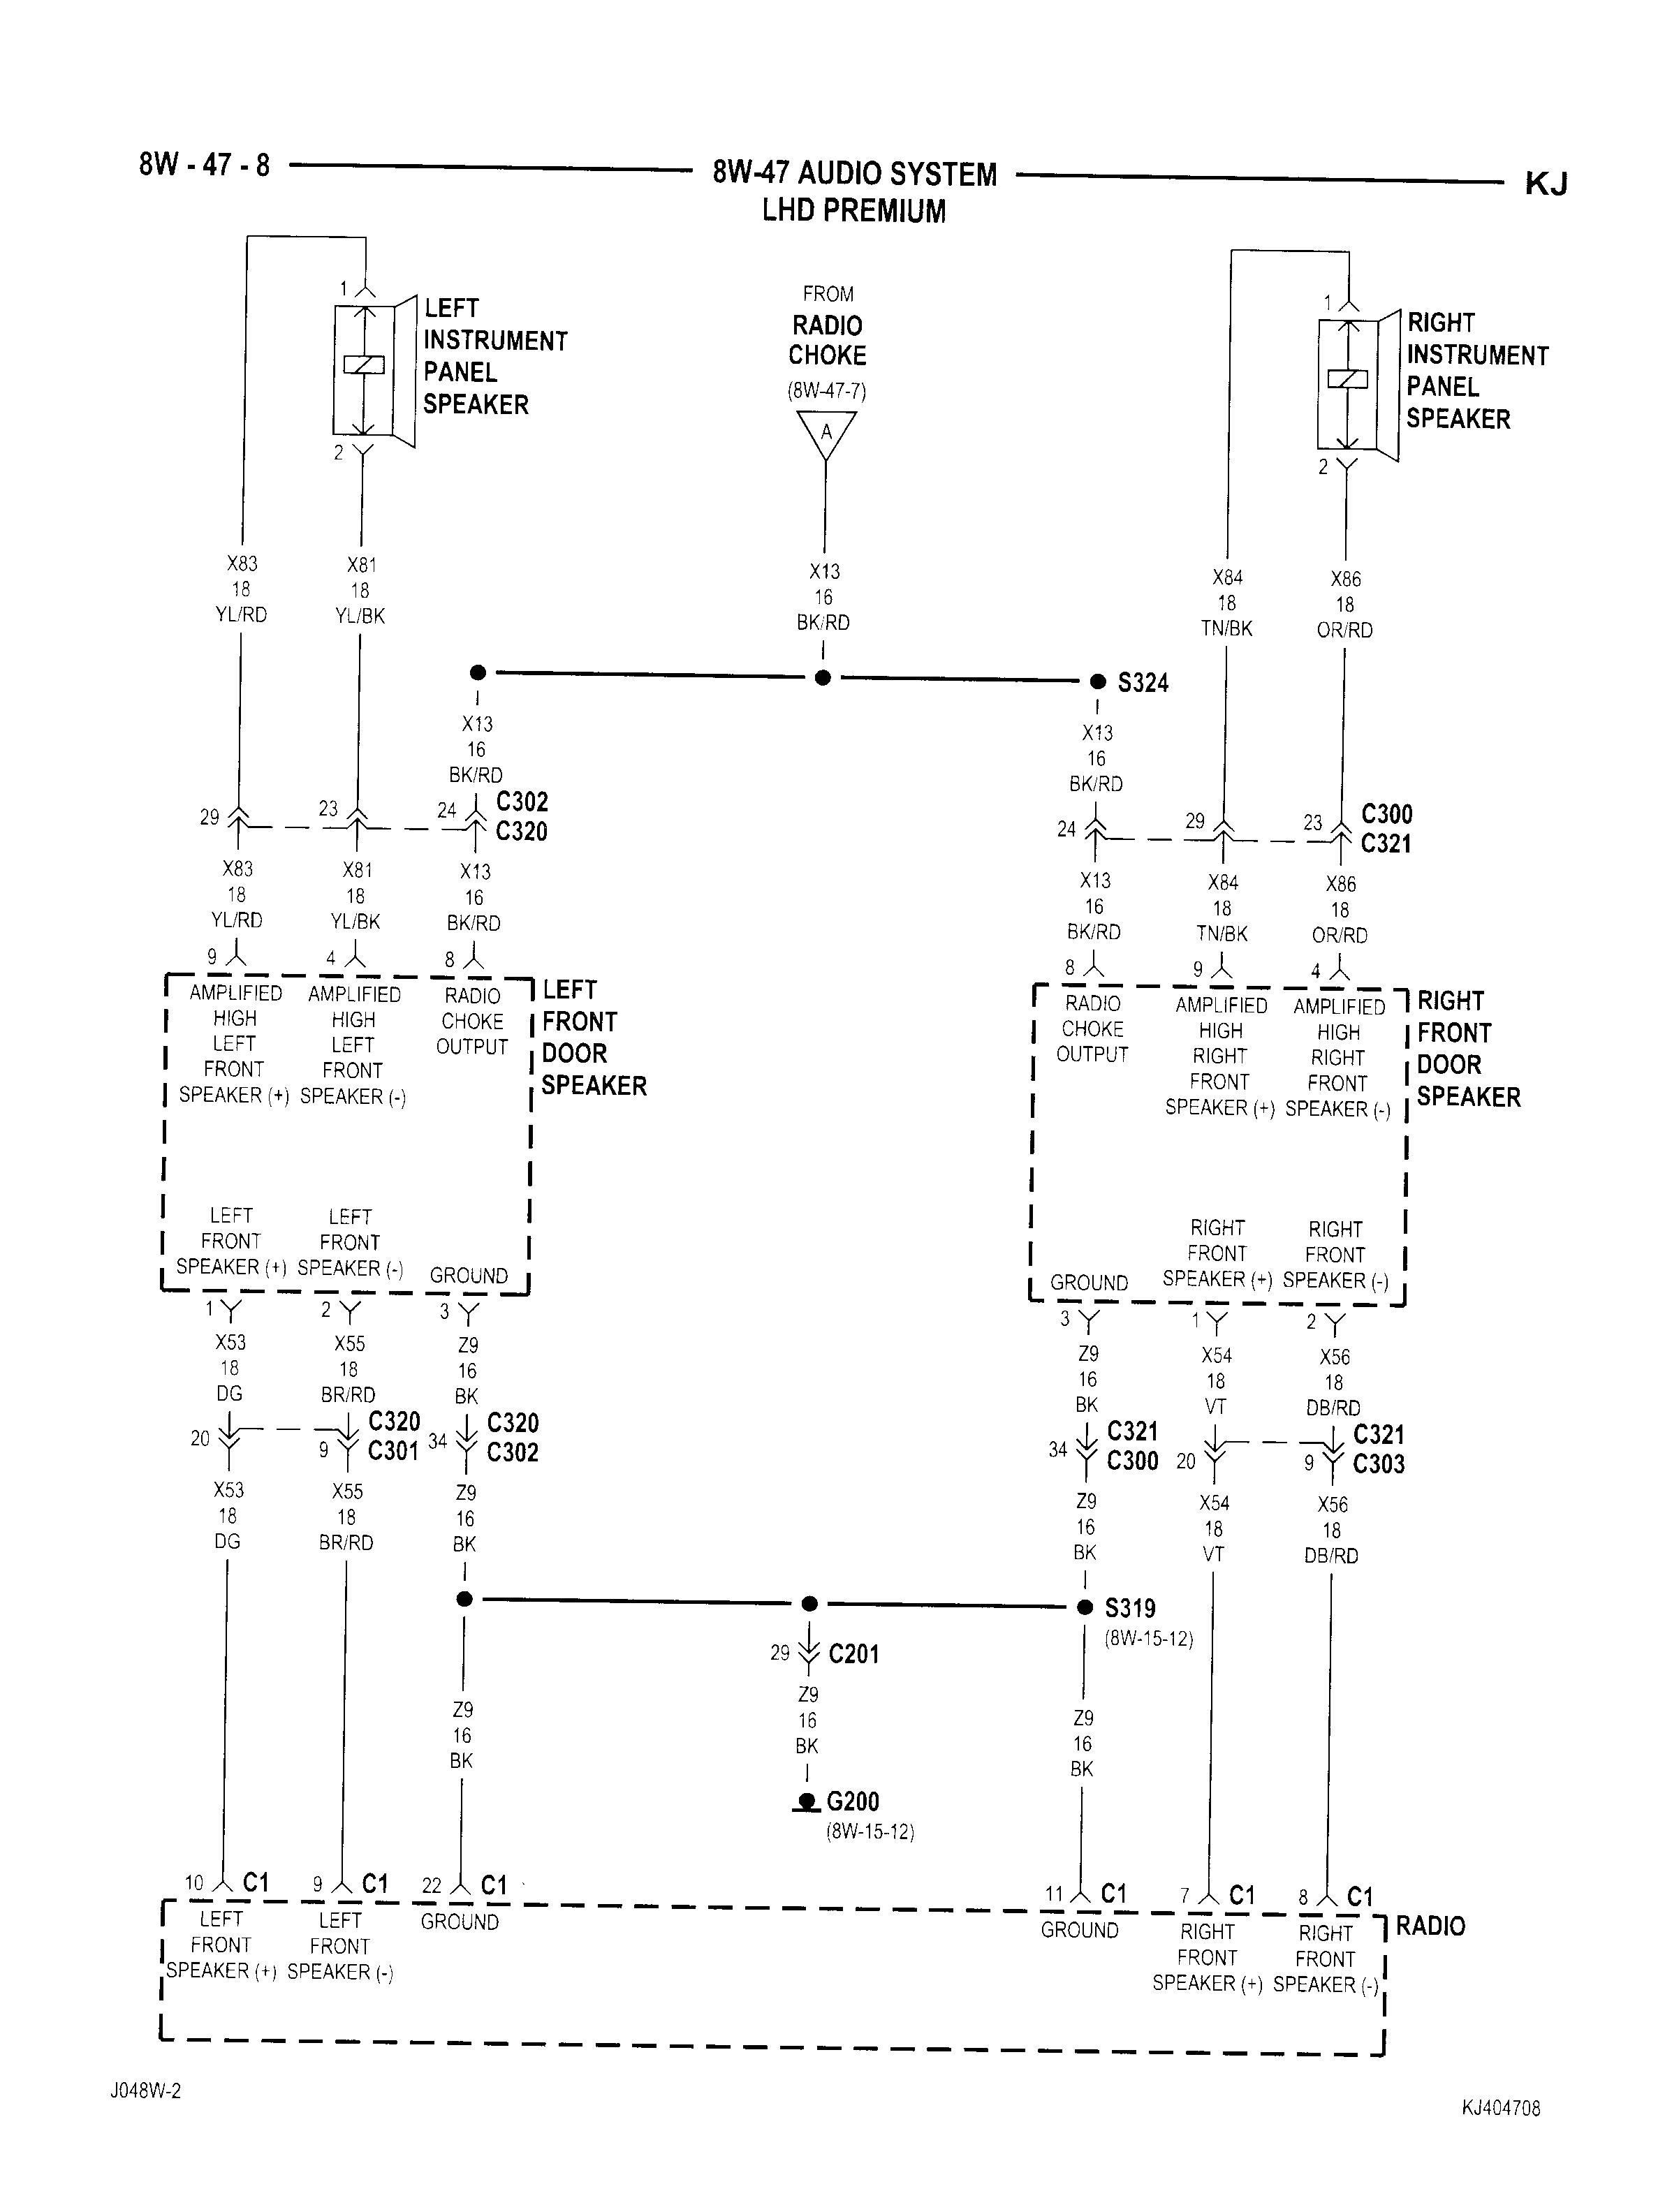 05 jeep liberty wiring diagram wiring diagram query 2003 jeep liberty pcm wiring